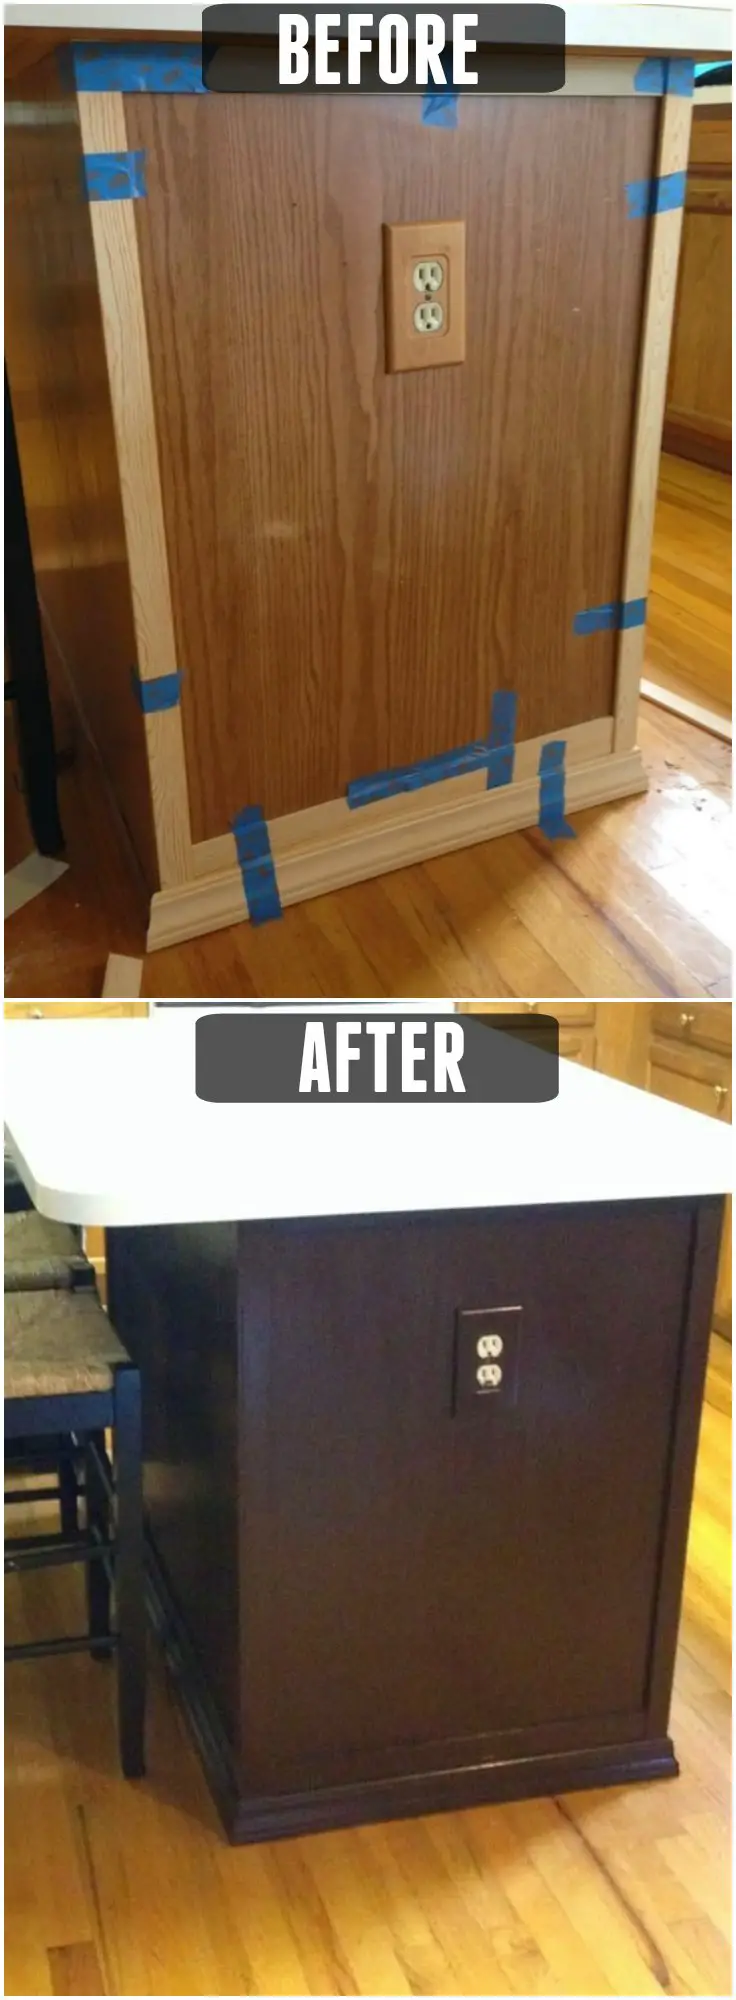 Before After, Upgrade cabinets, DIY Ideas To Upgrade Your Kitchen